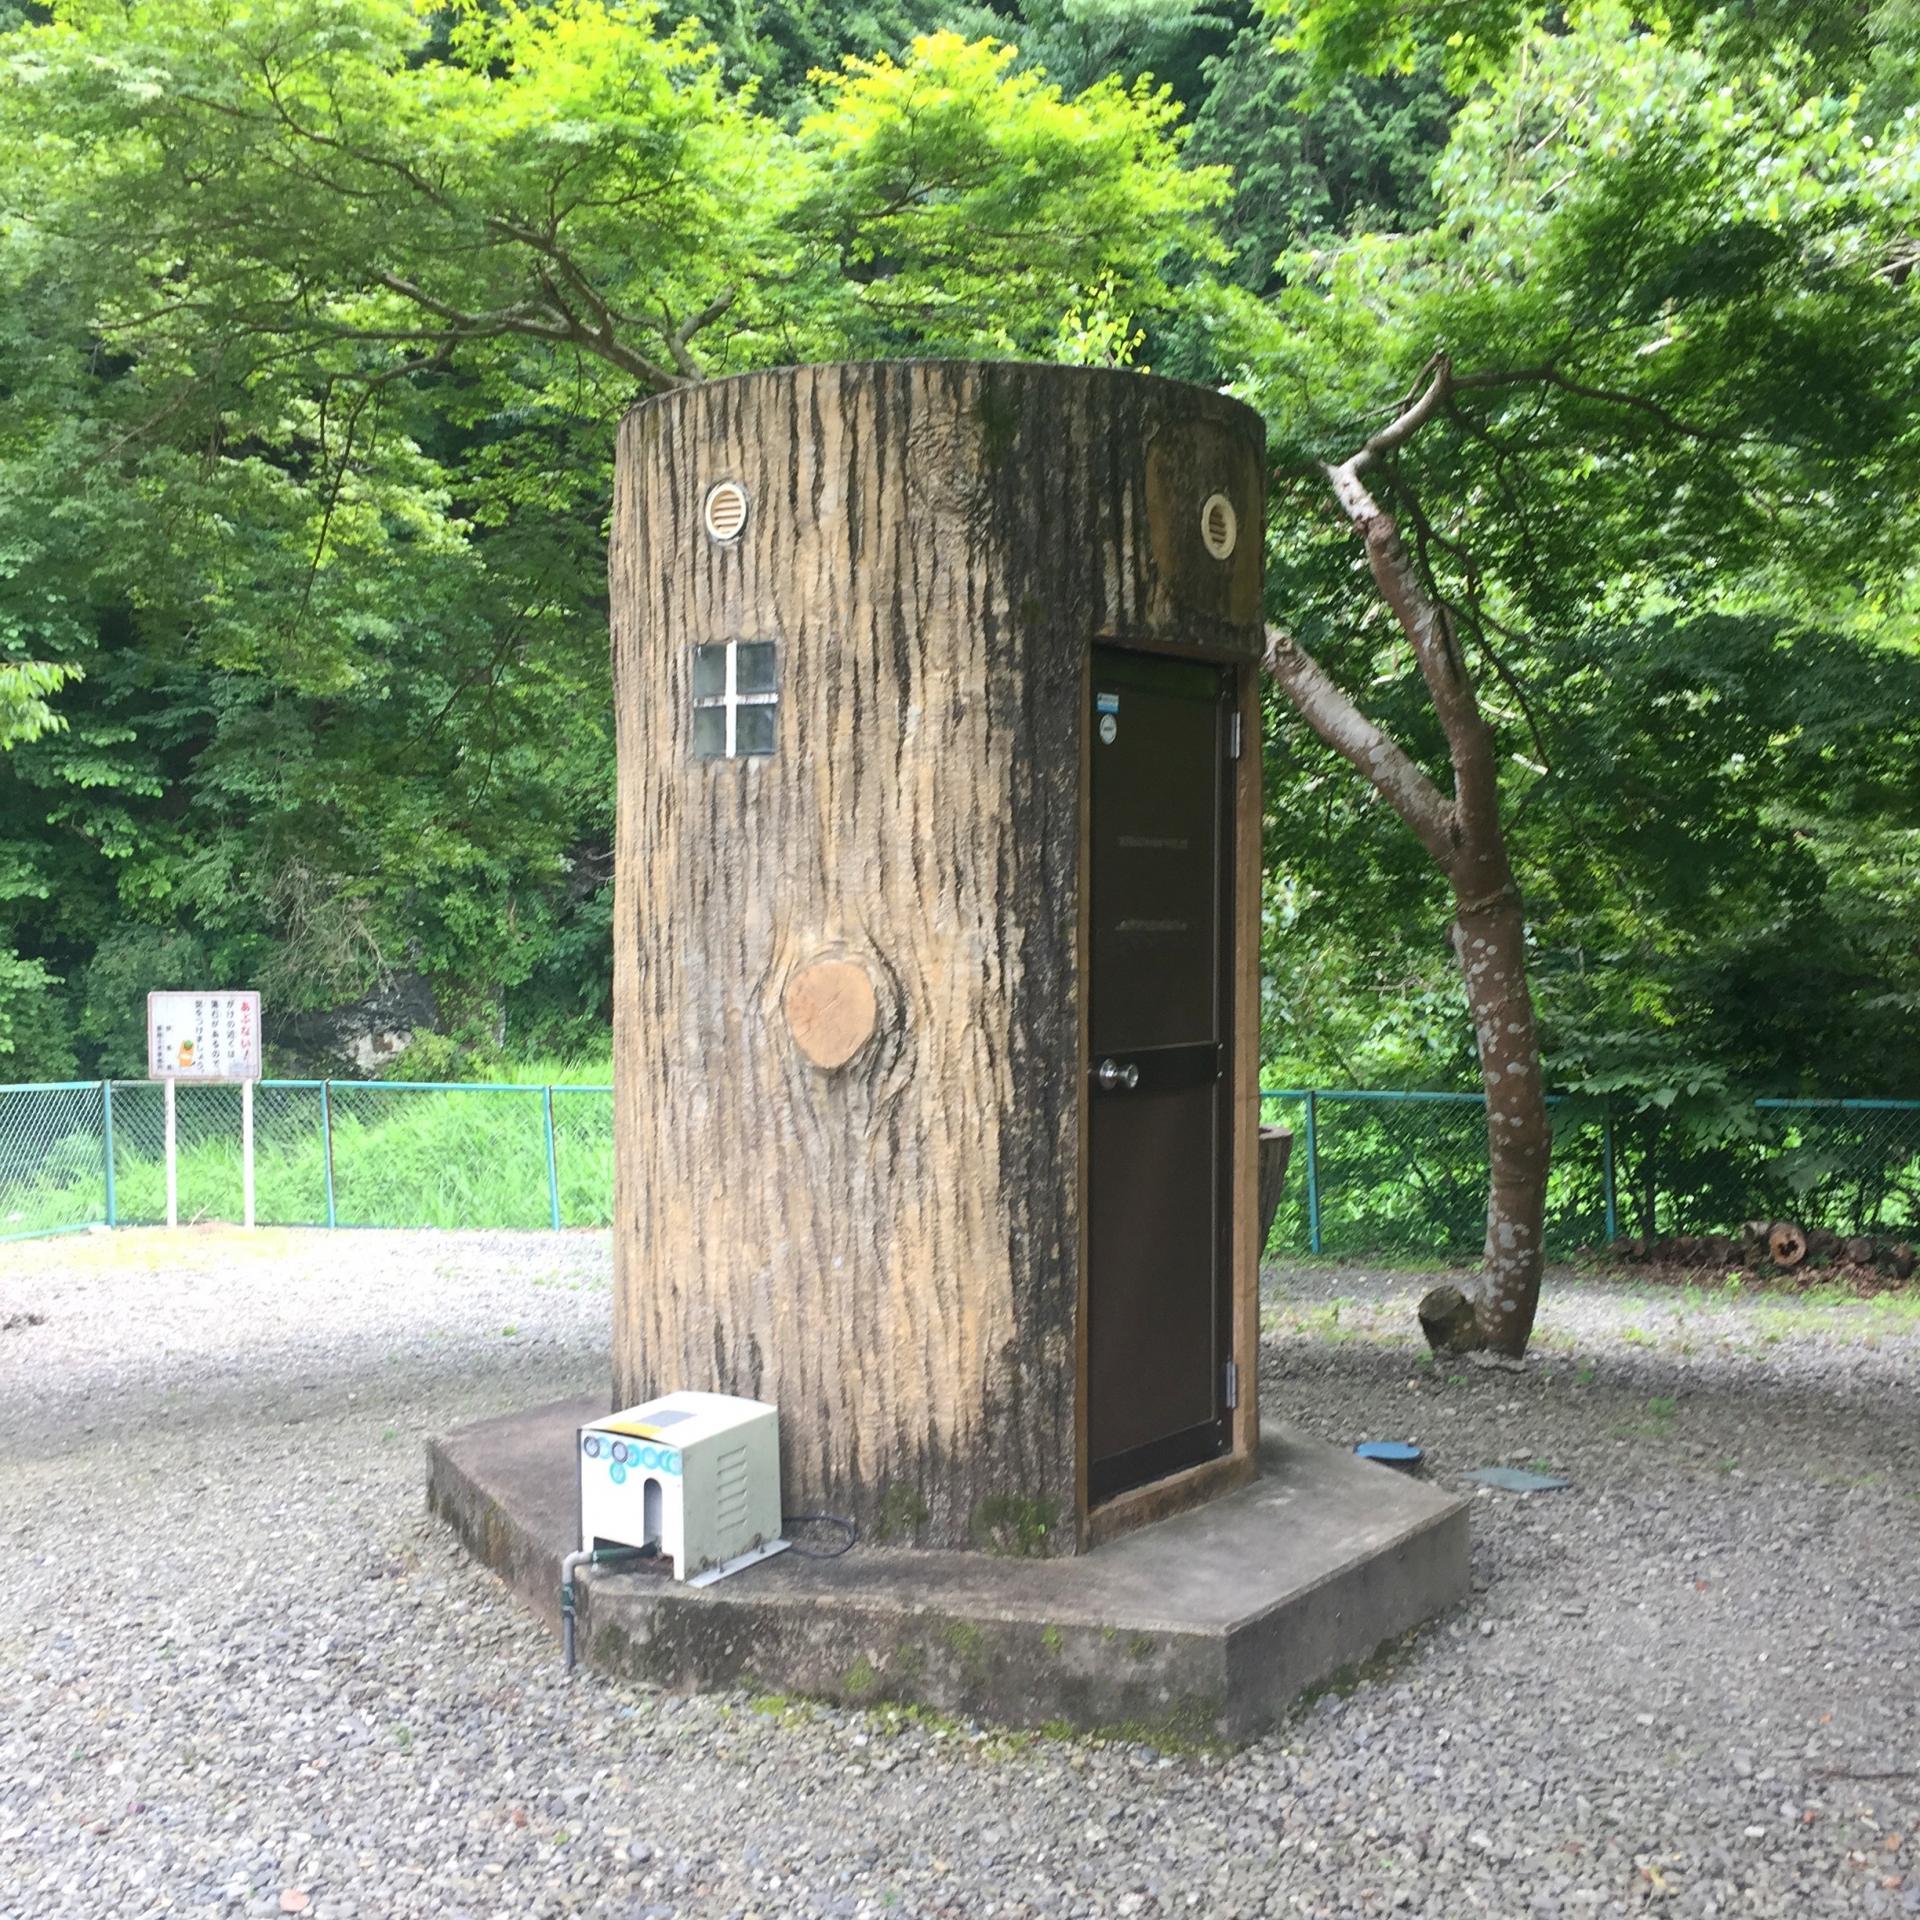 Utility shed made to look like a large tree stump